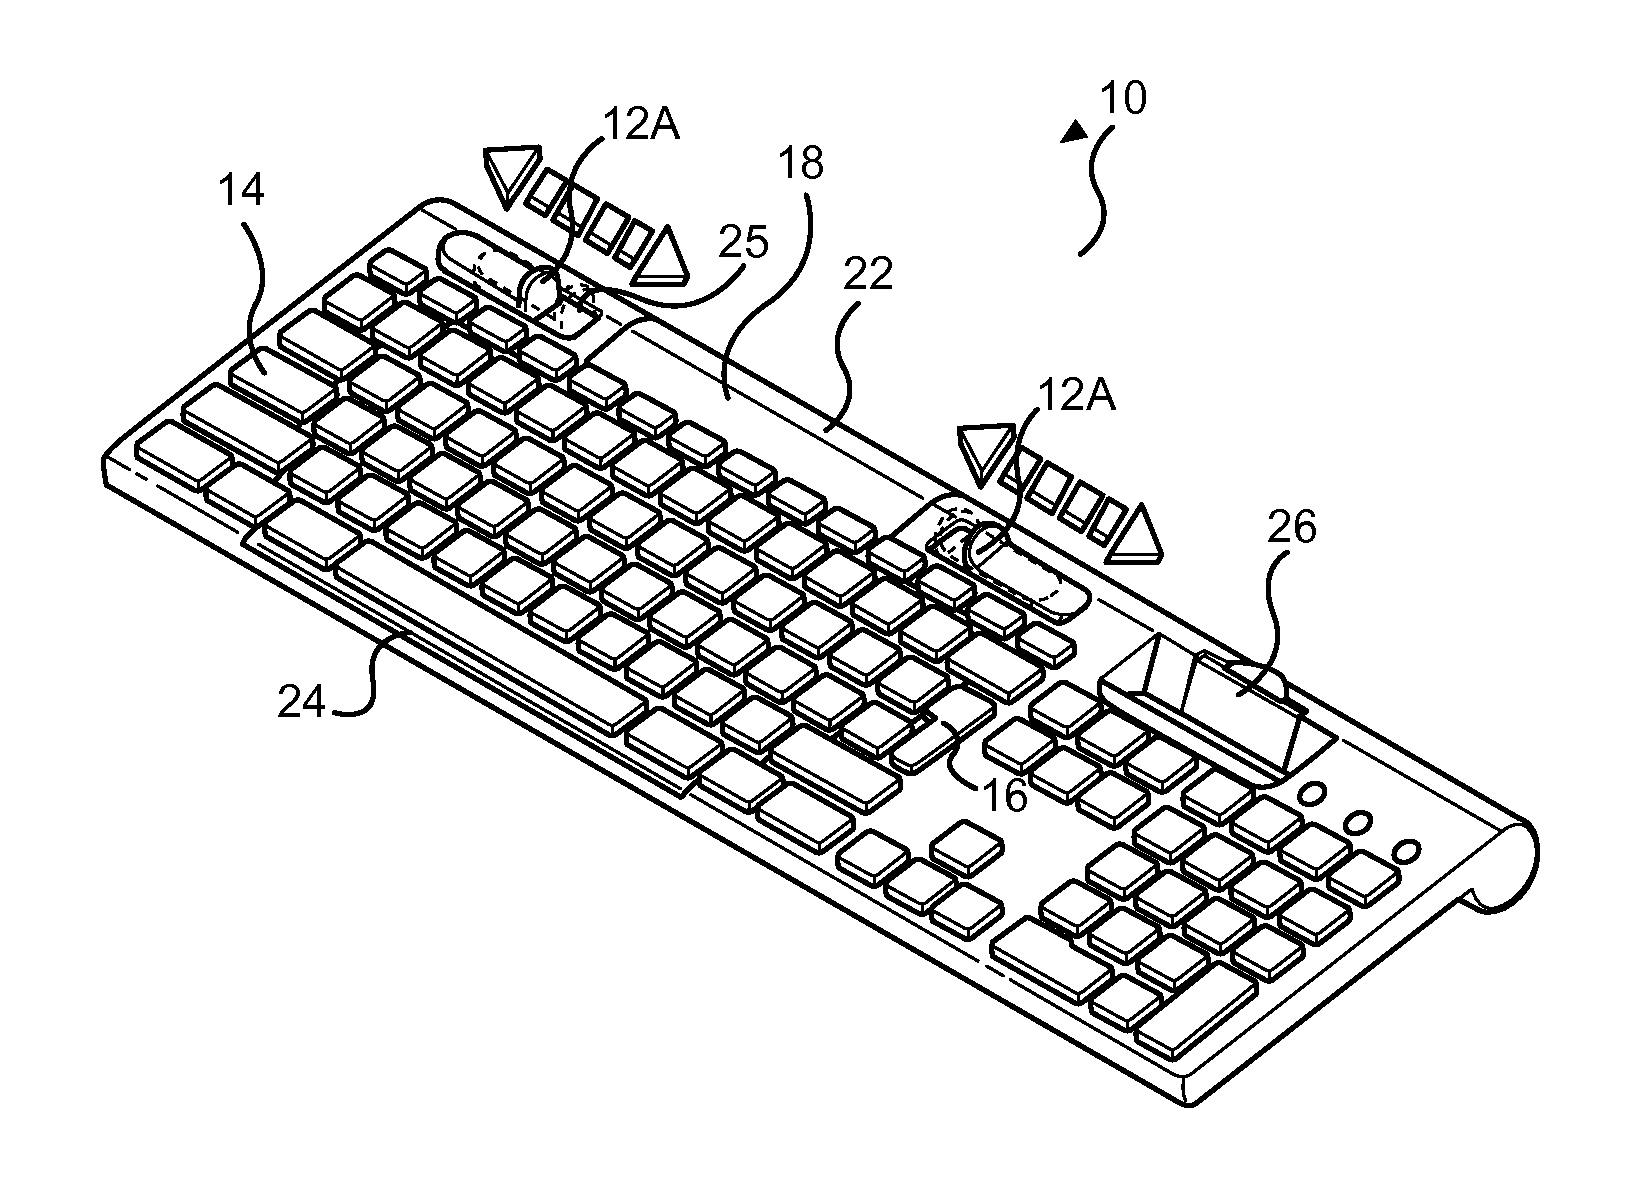 Computer Keyboard System with Alternative Exercise Capabilities for the Prevention of Repetitive Stress Injuries